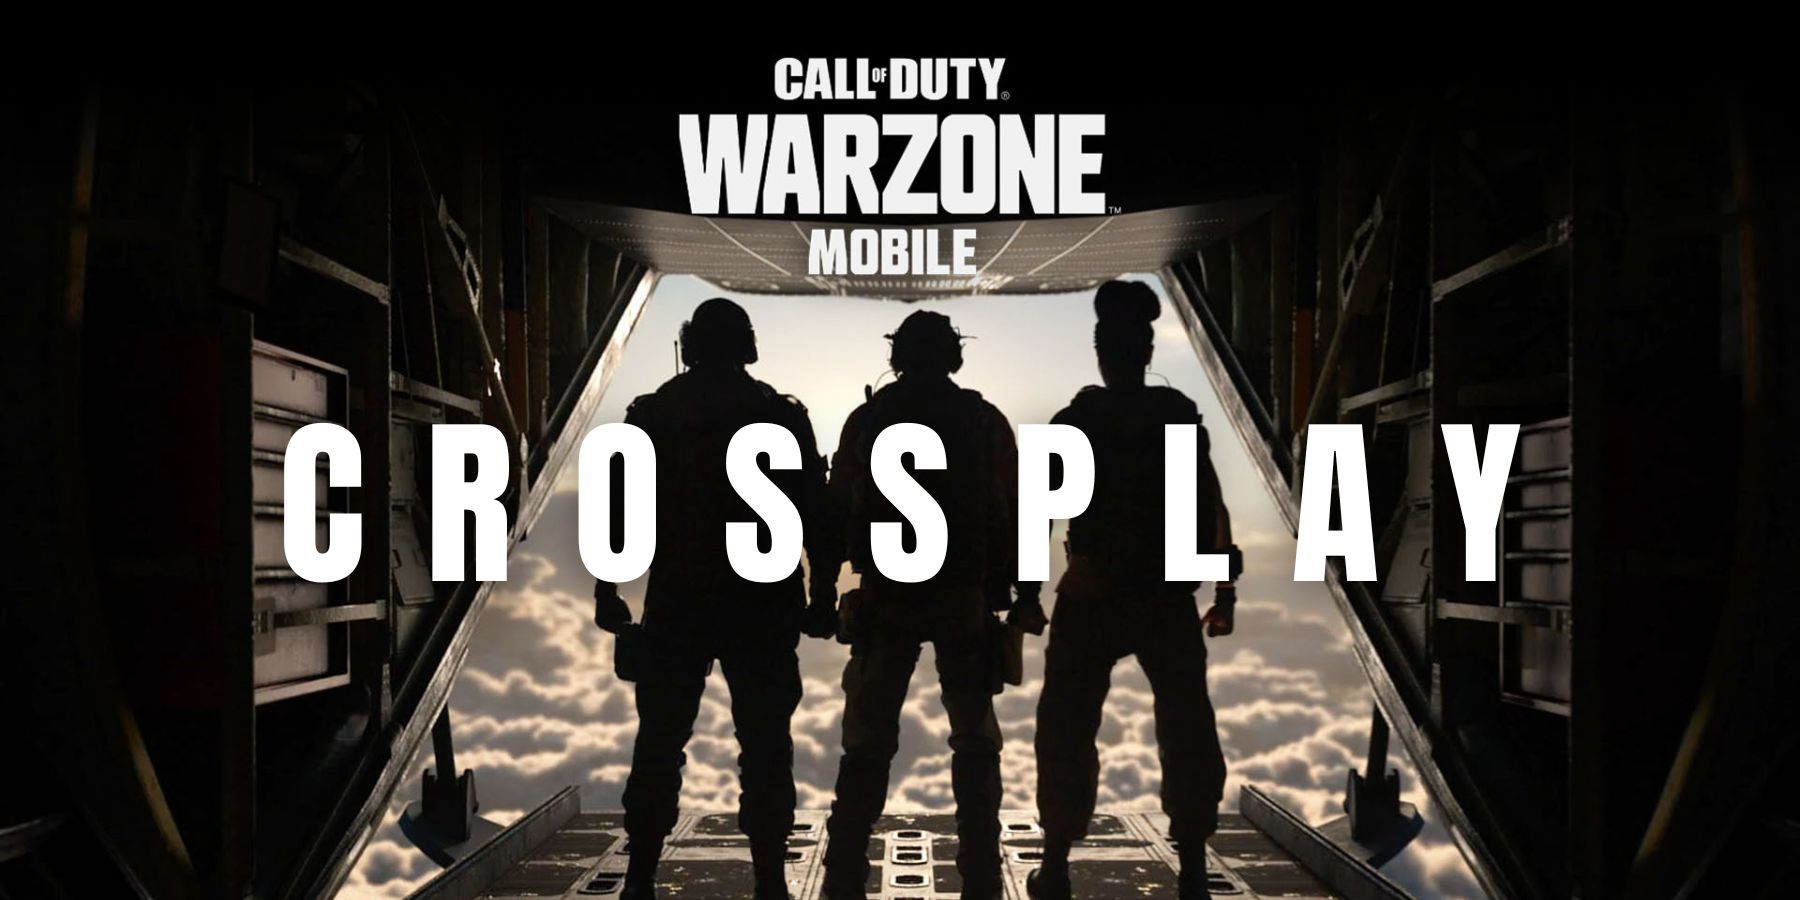 call of duty: warzone mobile - is there crossplay?